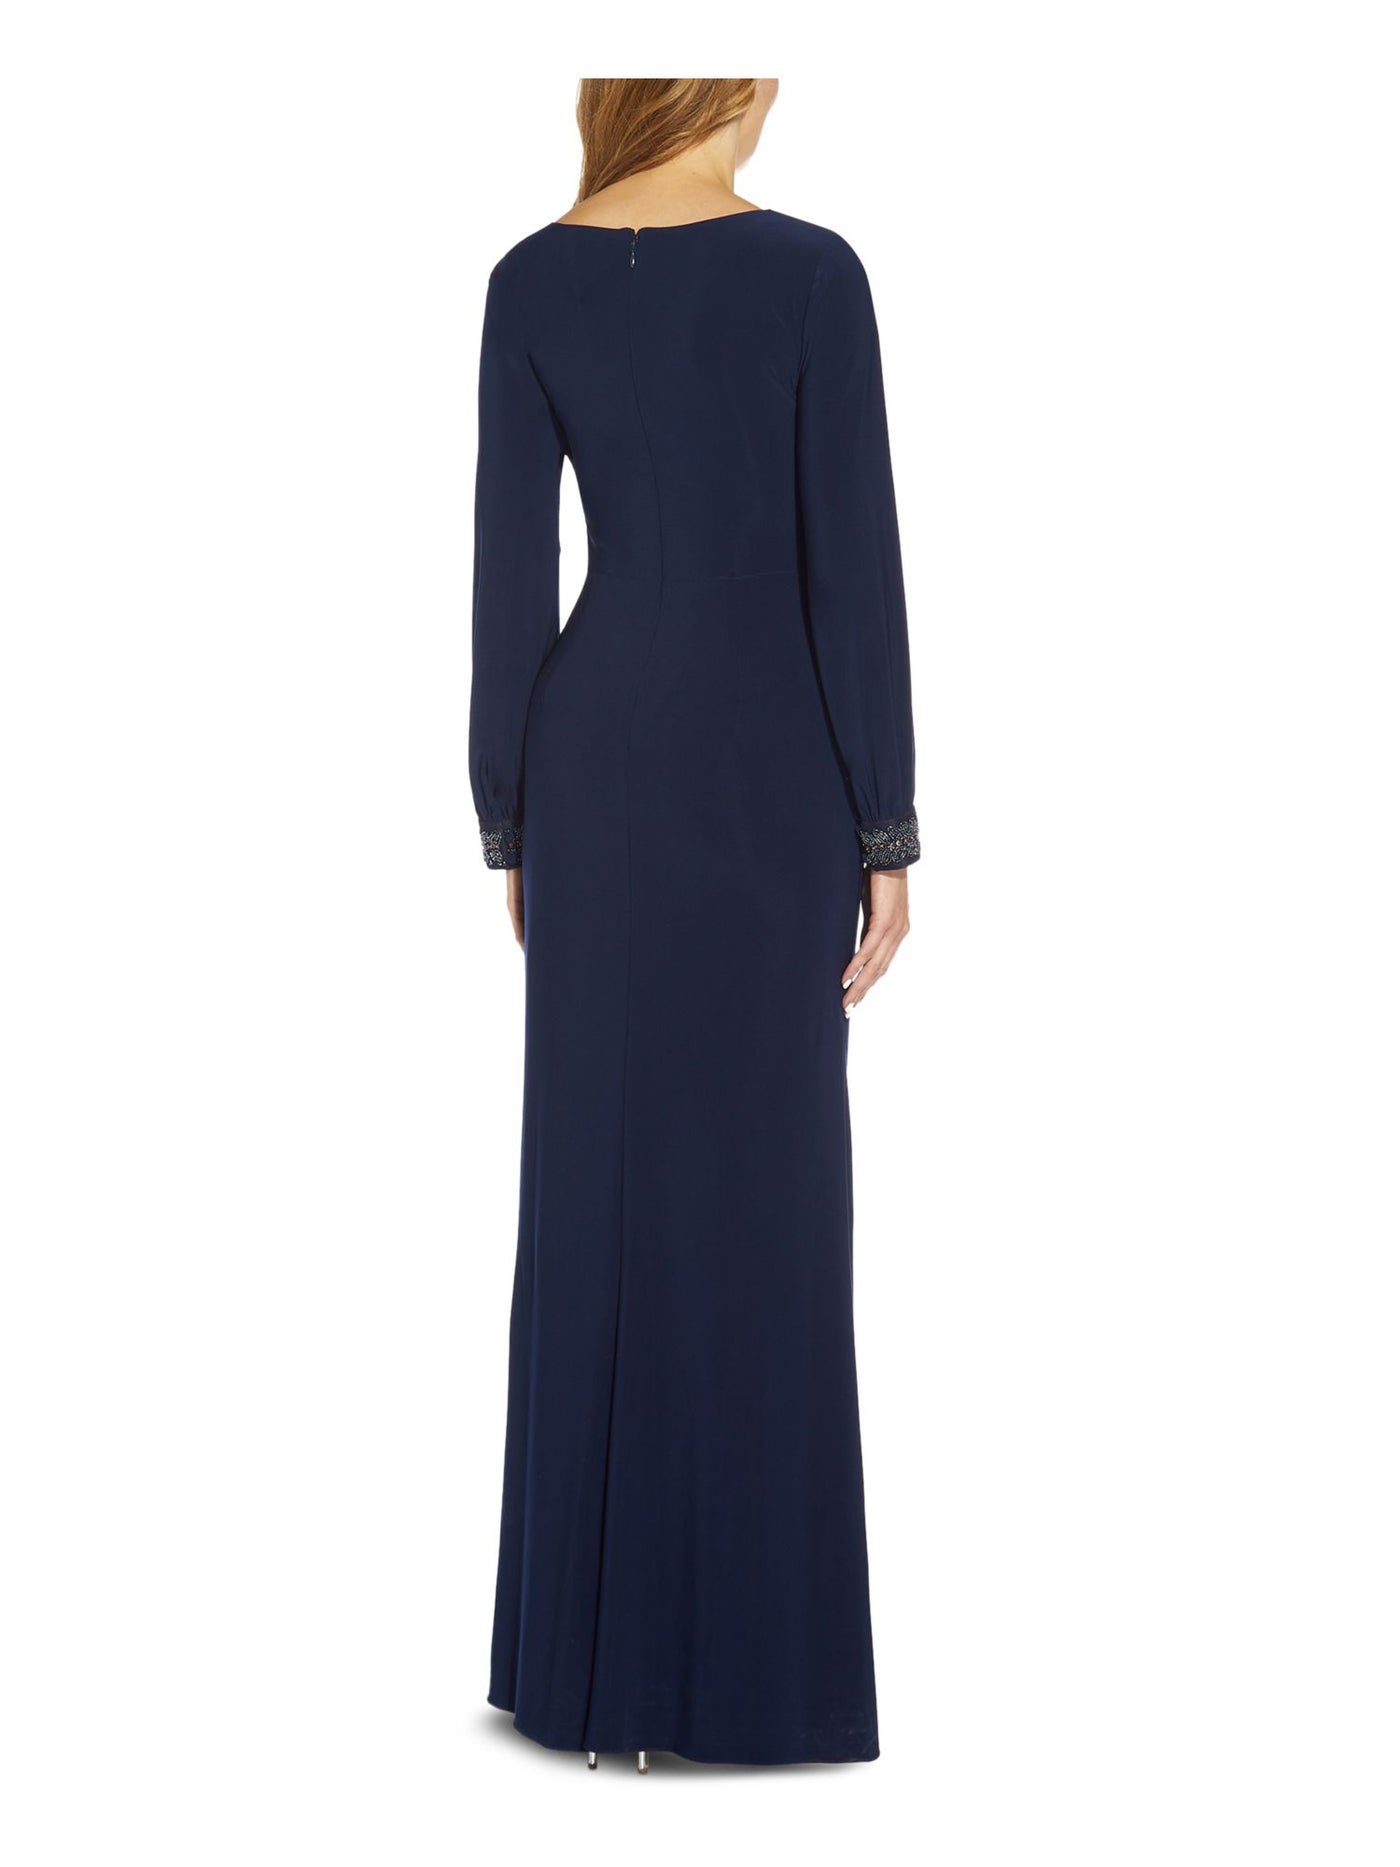 ADRIANNA PAPELL Womens Navy Zippered Pleated Ruffled Slit Lined Long Sleeve Surplice Neckline Full-Length Evening Gown Dress 6